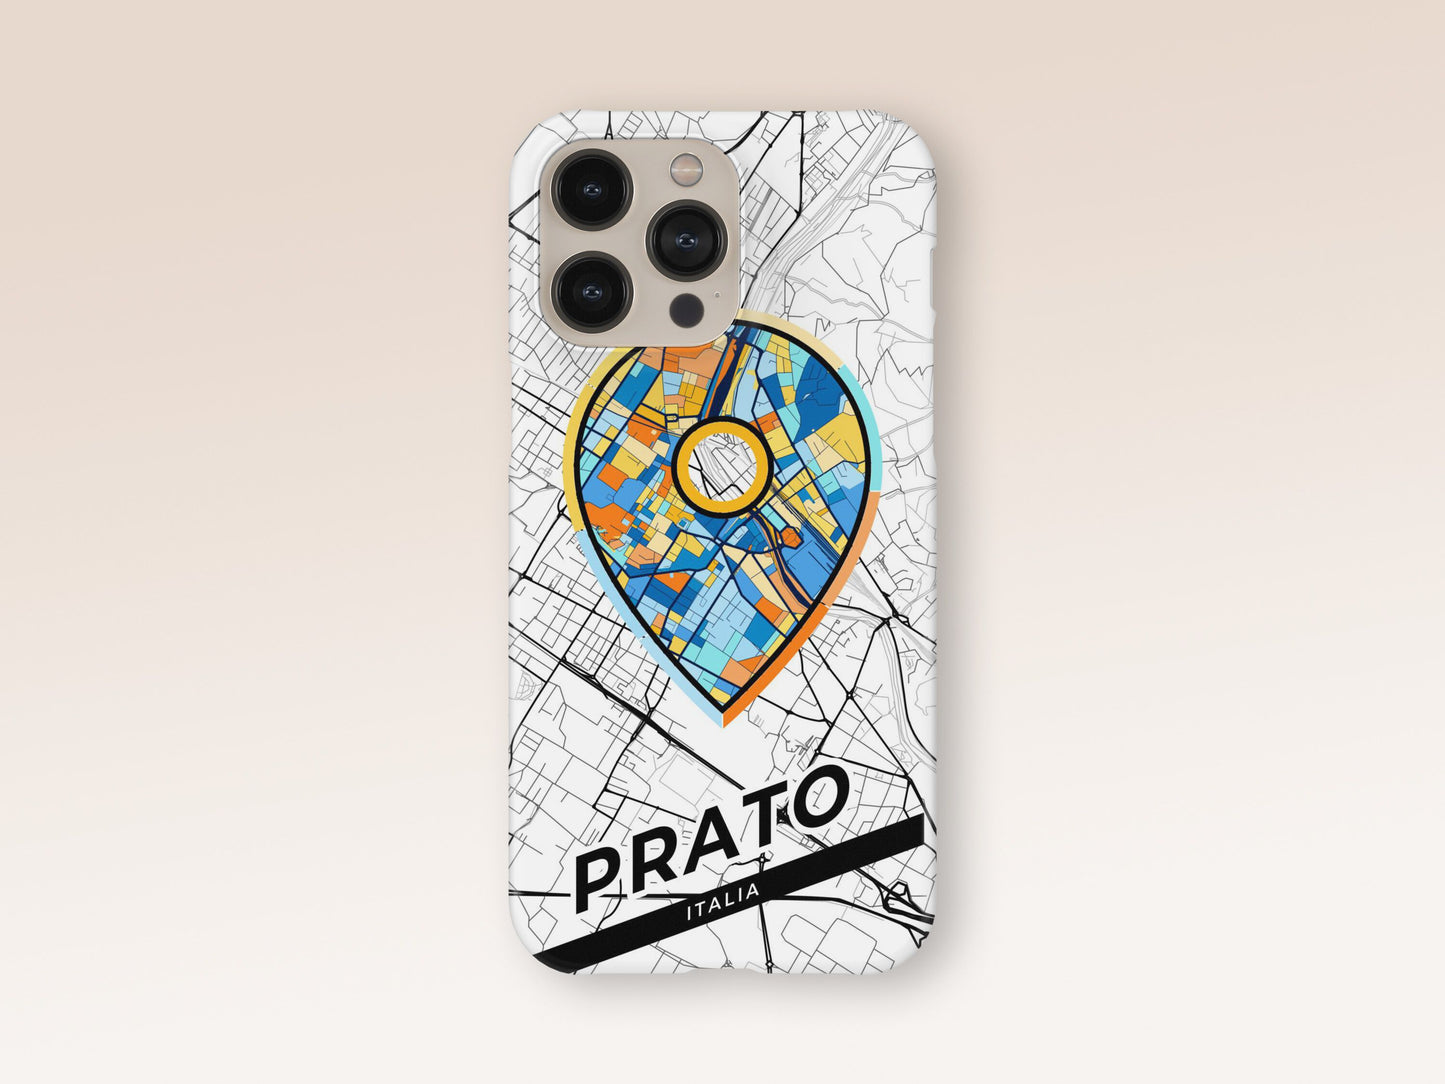 Prato Italy slim phone case with colorful icon. Birthday, wedding or housewarming gift. Couple match cases. 1